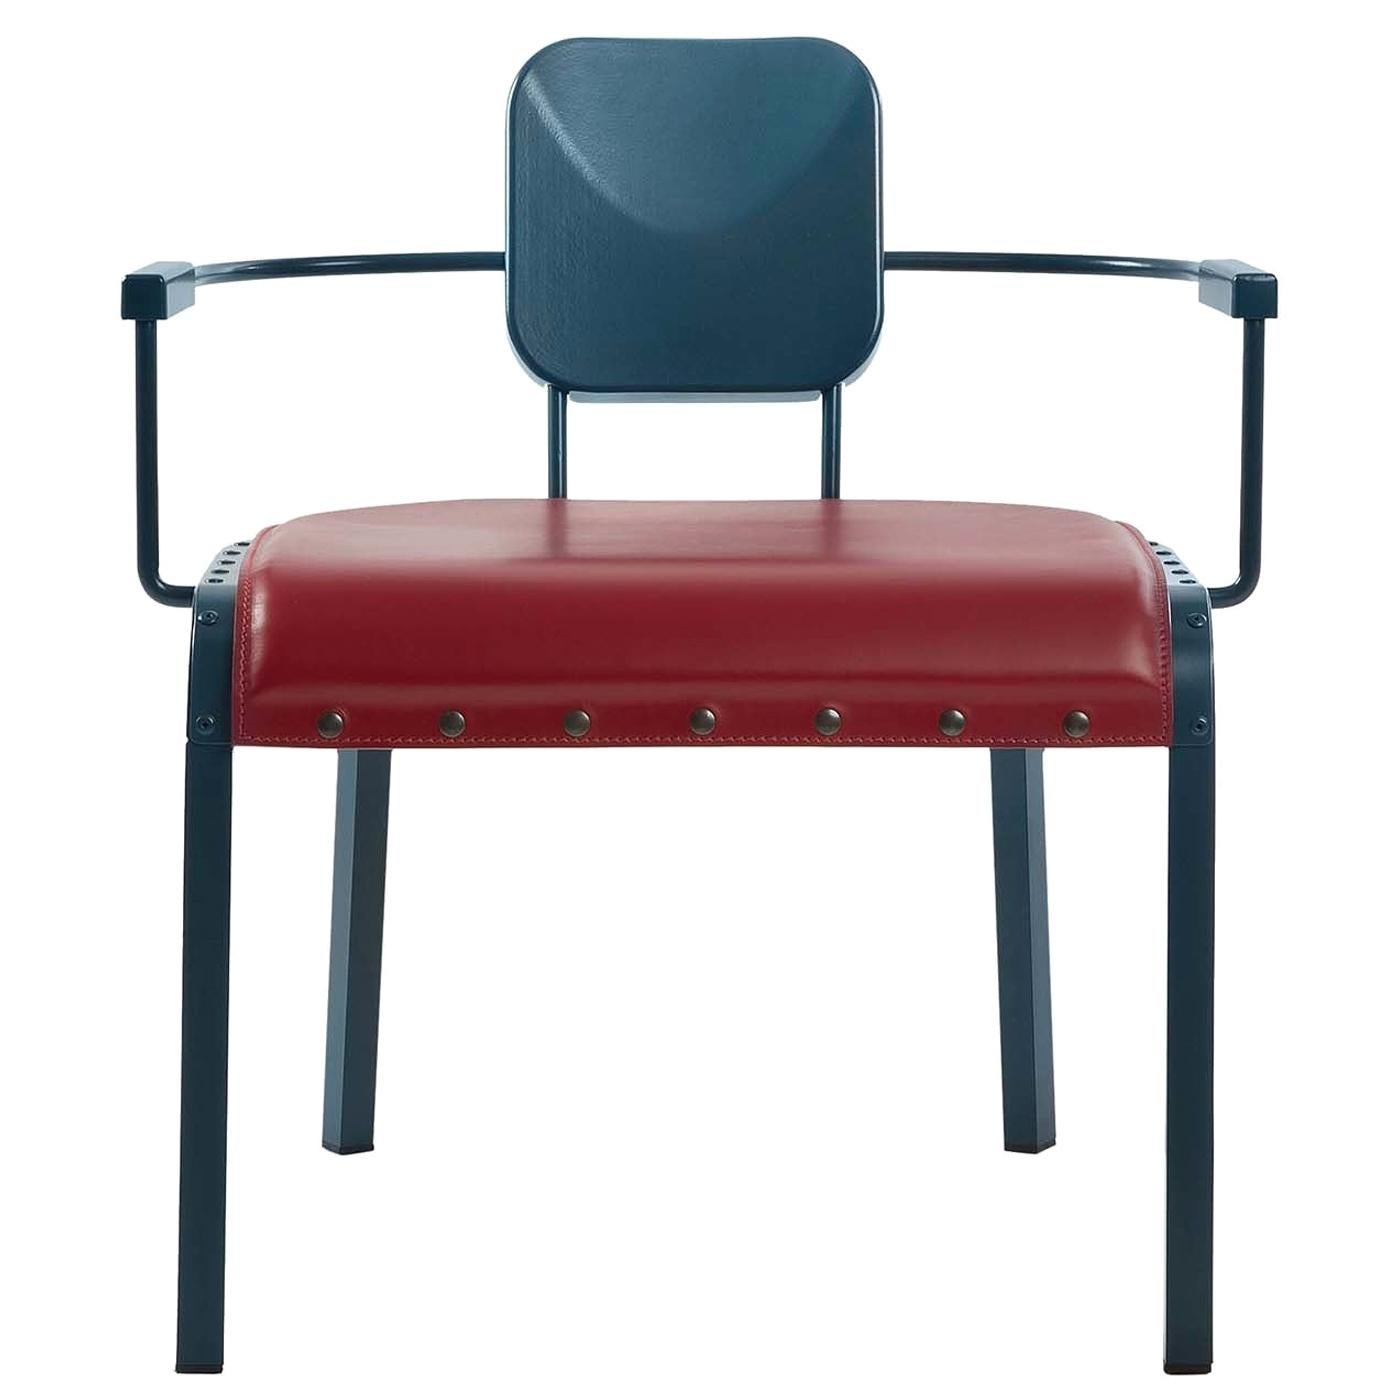 Rock4 Blue Lounge Armchair with Red Leather Seat by Marc Sadler For Sale